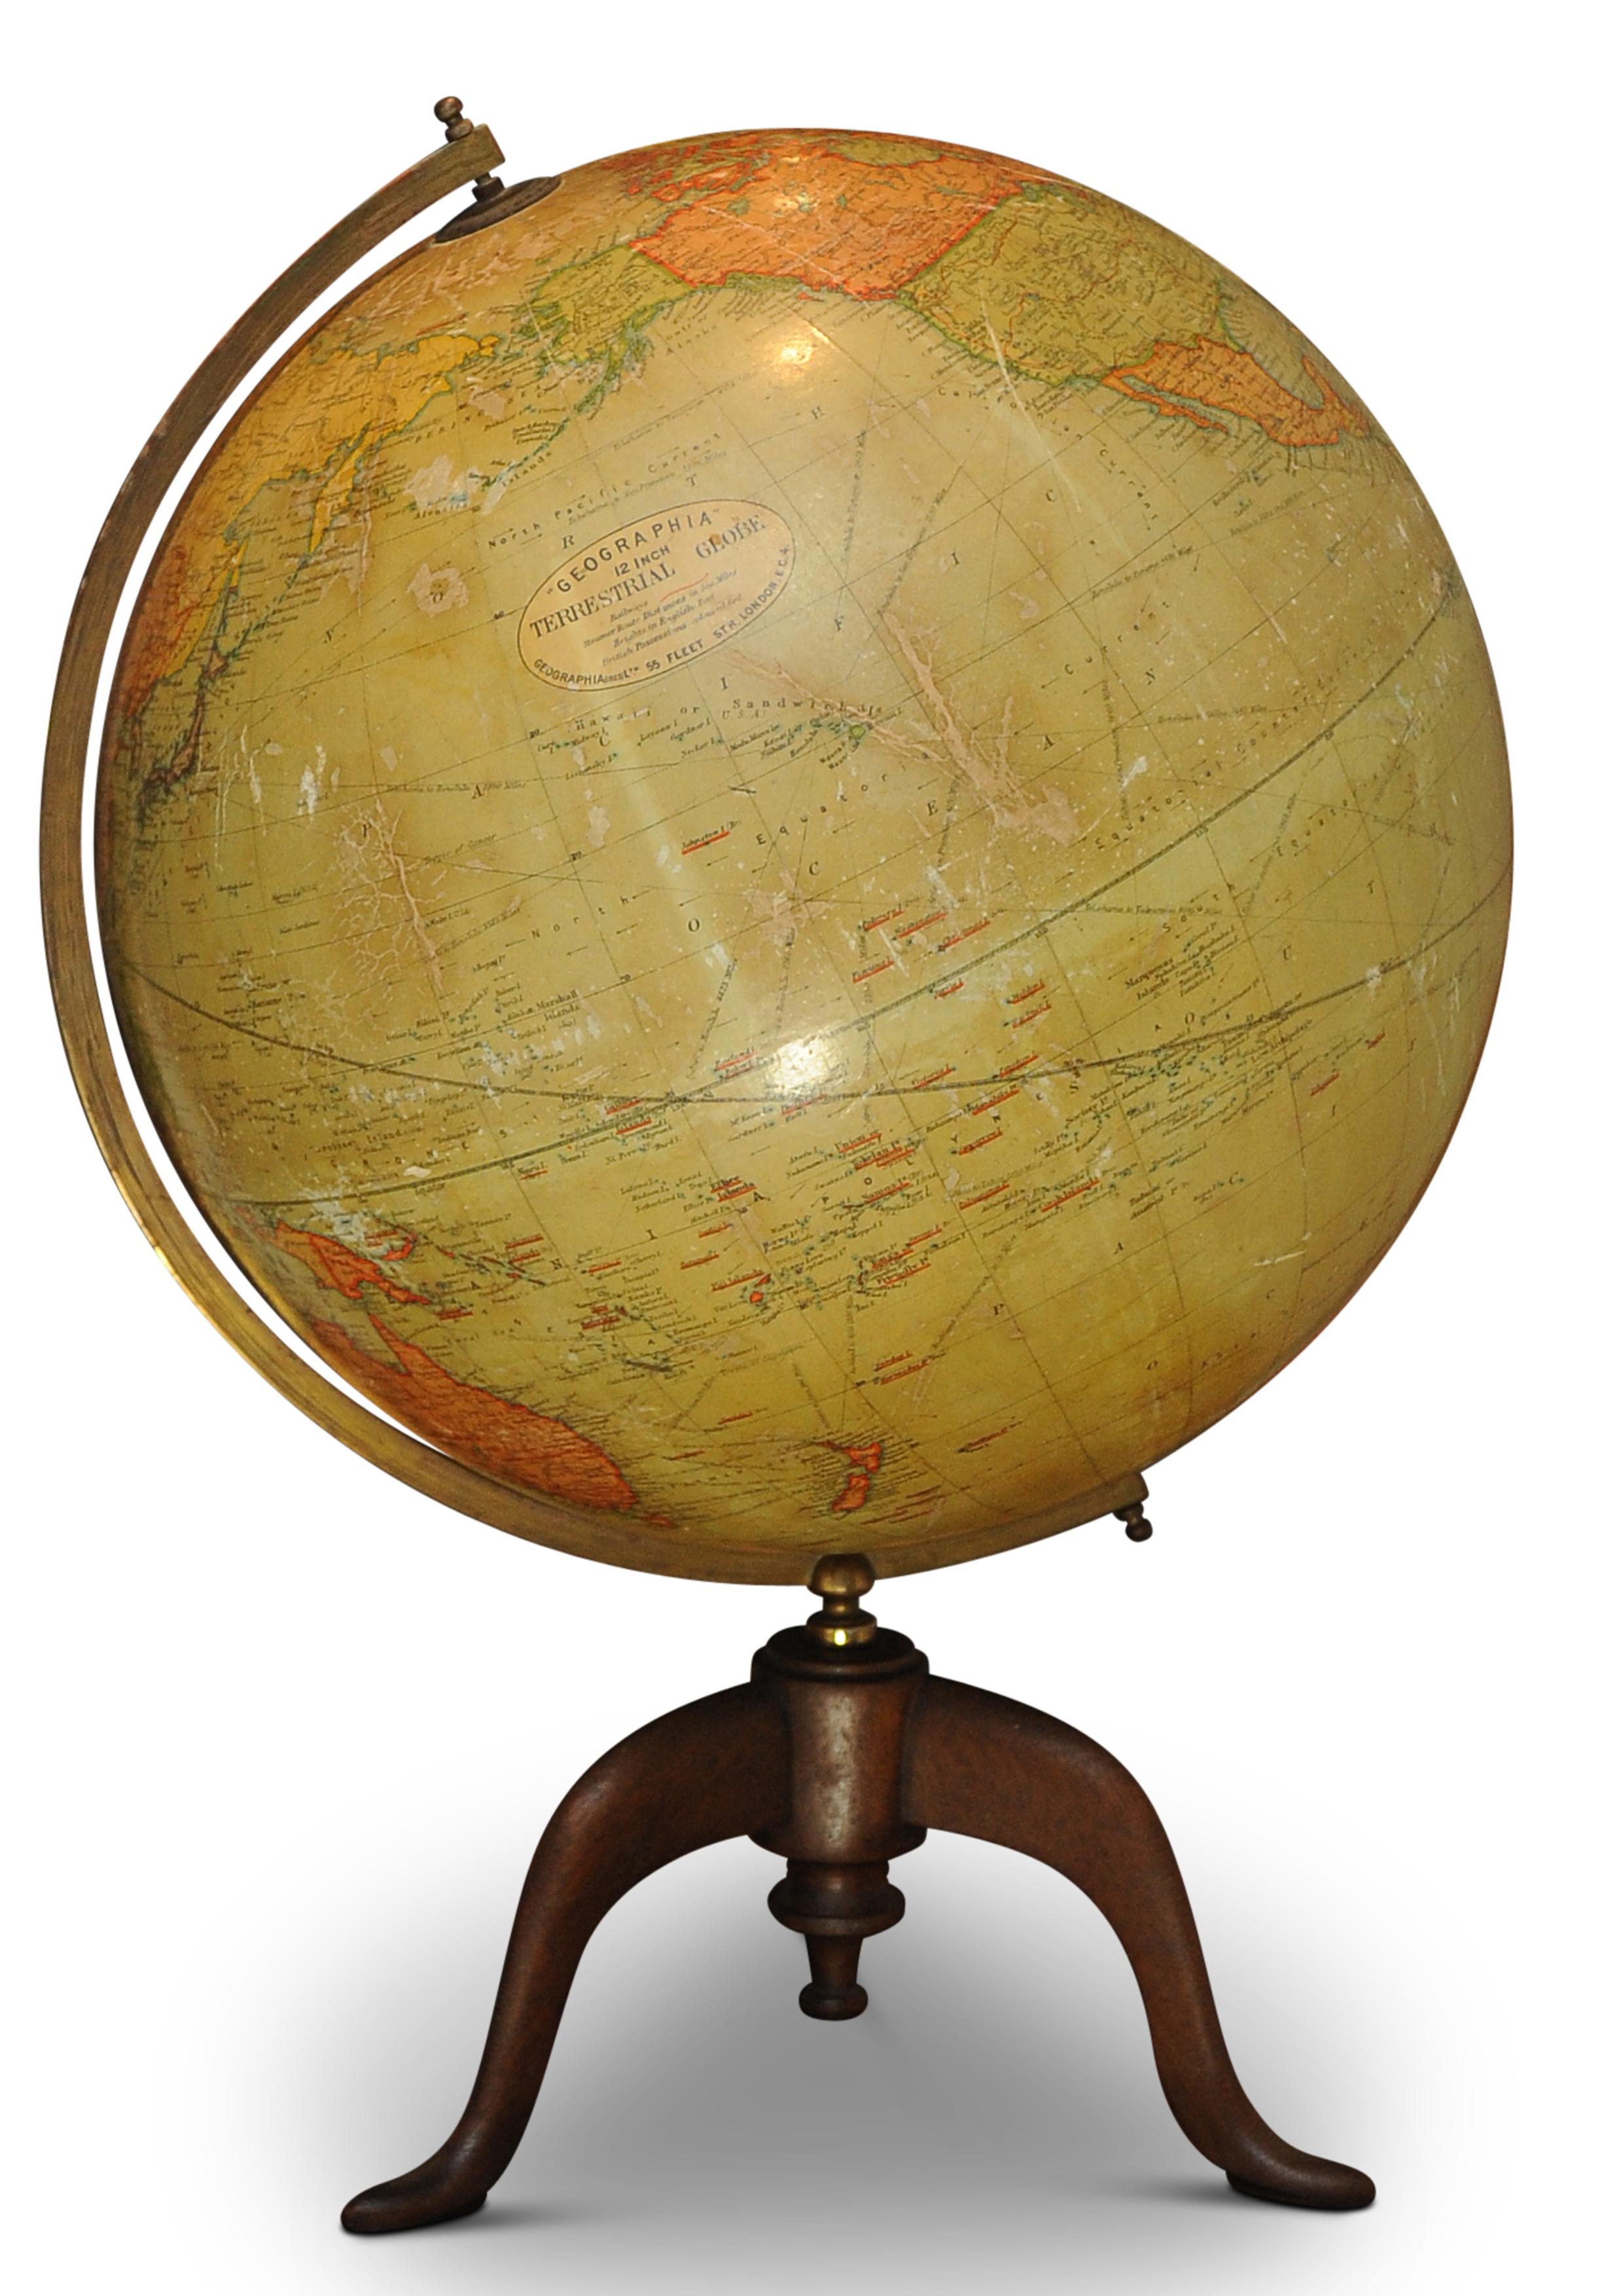 British Antique World Globe From Fleet Street London 1923 on Wooden Stand For Sale